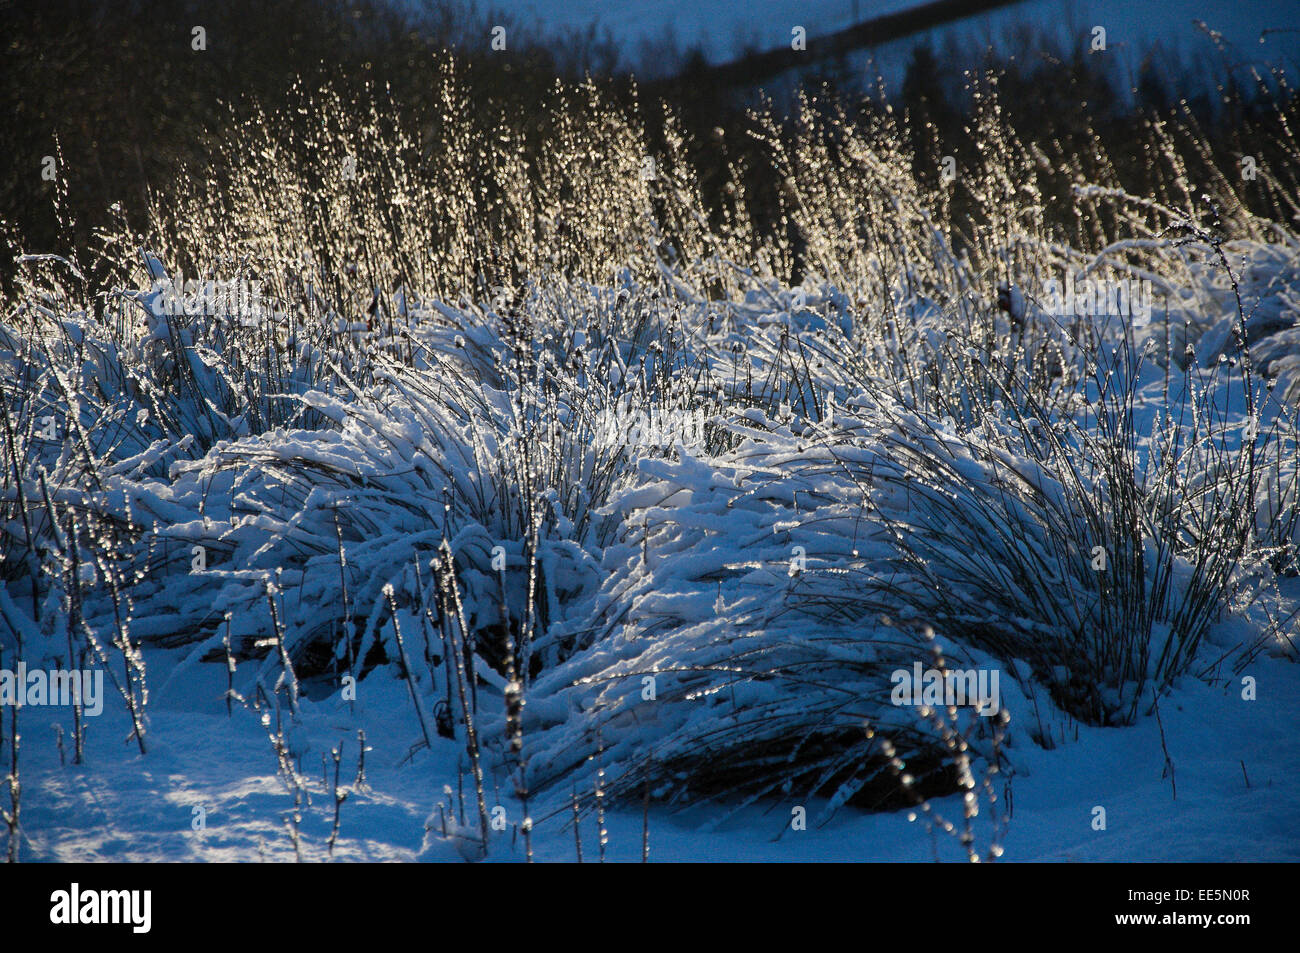 Builth Wells, Powys, Wales, UK. 14th January, 2015. The rising sun starts to melt the snow last nights snowfall.  Credit:  Graham M. Lawrence/Alamy Live News. Stock Photo